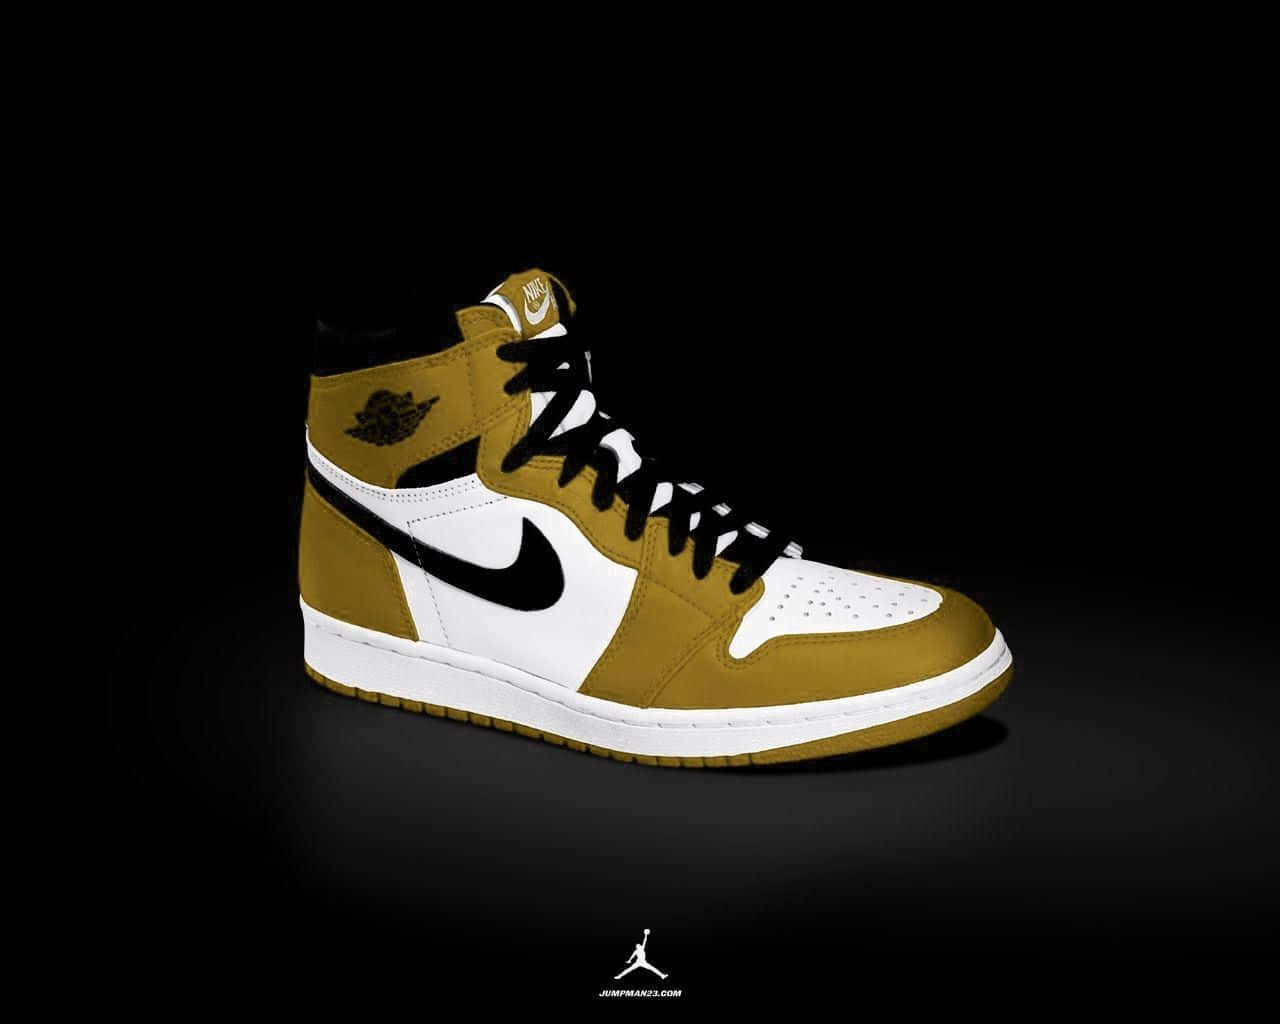 A Gold And White Jordan Shoe On A Black Background Wallpaper